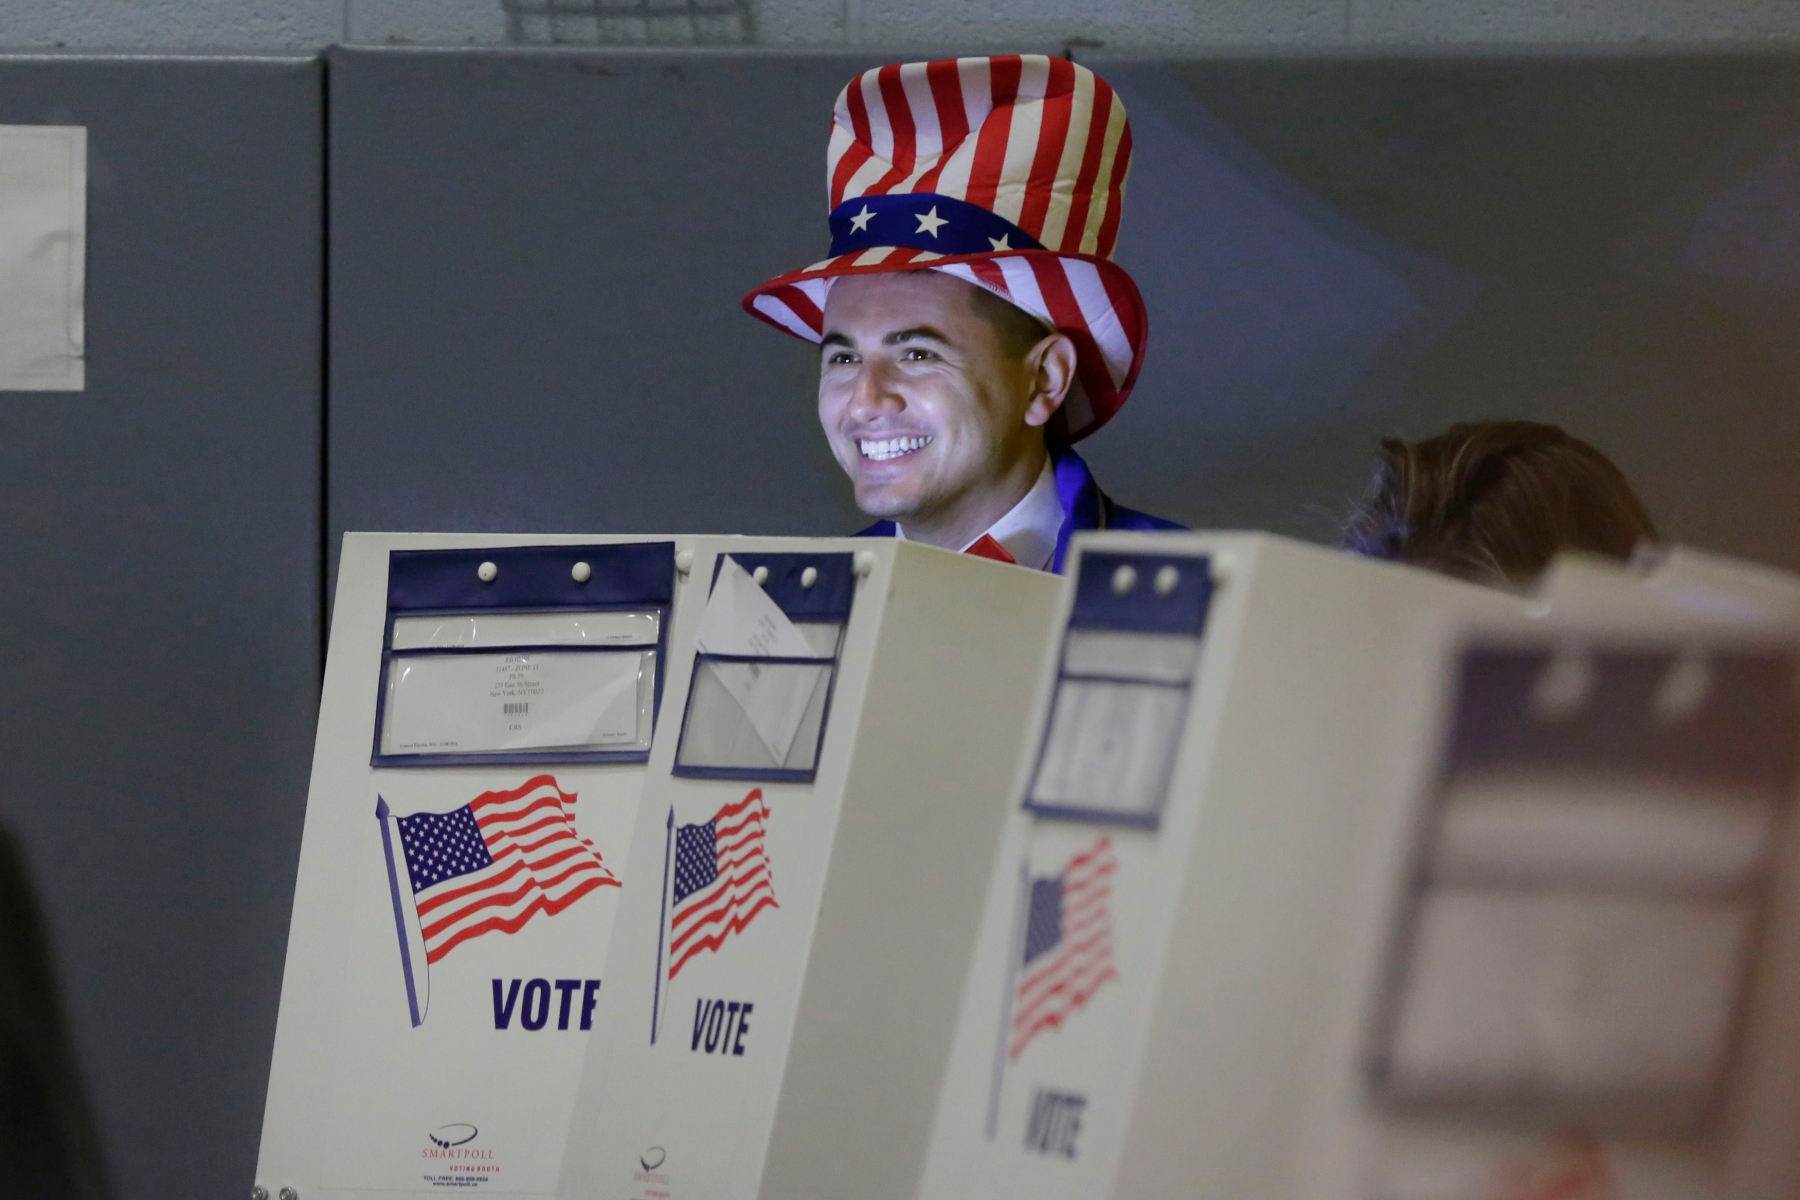 Travis Lopes, dressed in a patriotic outfit, votes in the polling place of Republican presidential candidate Donald Trump in New York, Tuesday, Nov. 8, 2016. (AP Photo/Richard Drew) Election 2016 Trump